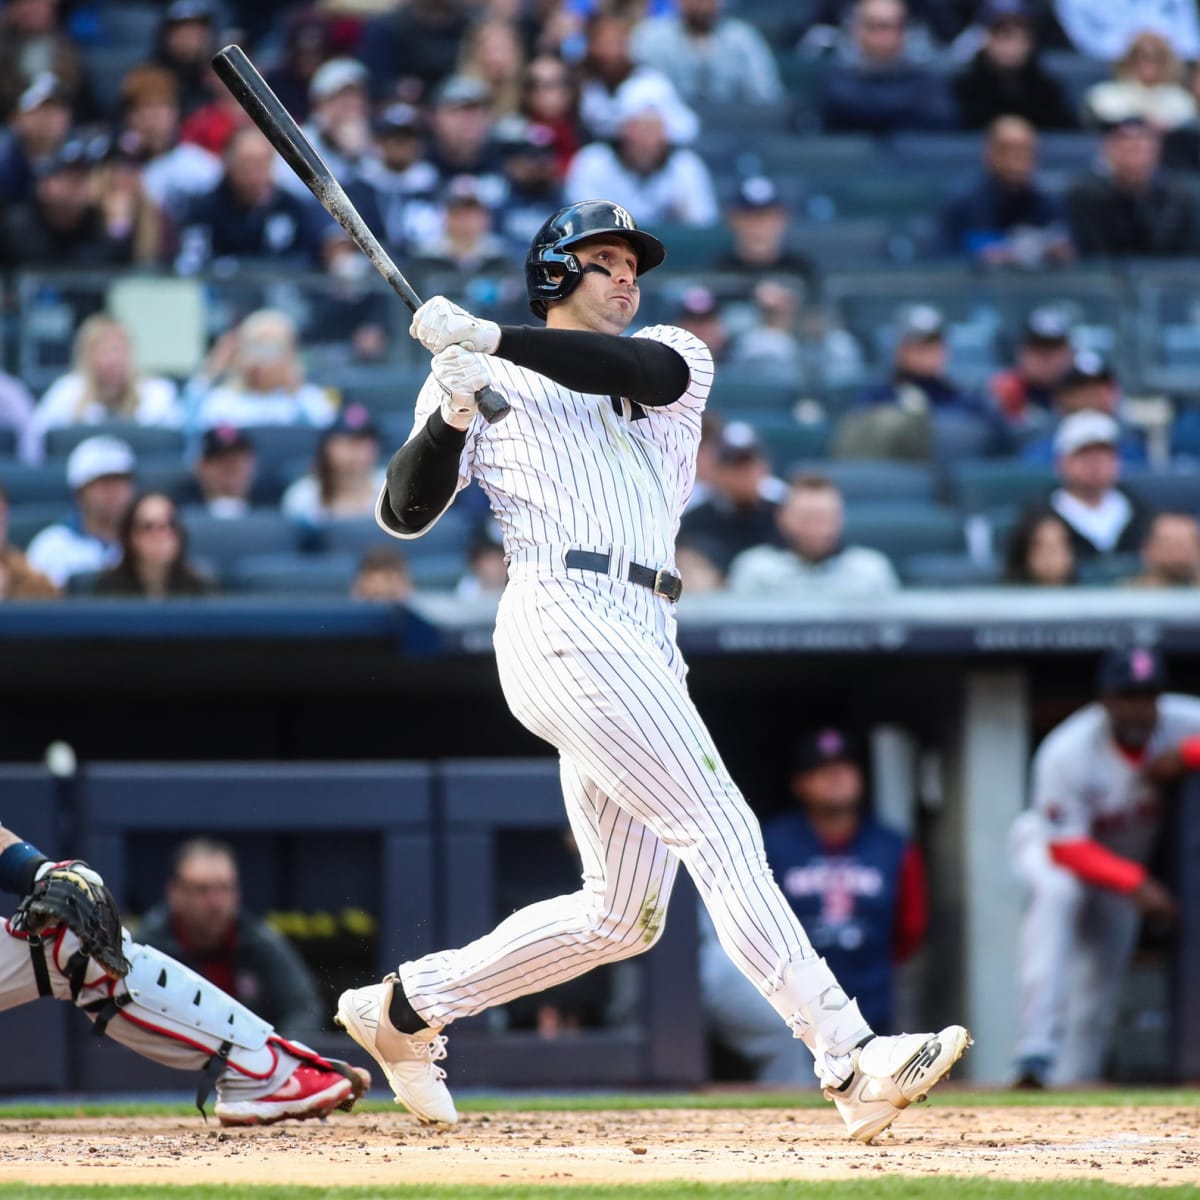 Yankees' Joey Gallo starting to see results at the plate